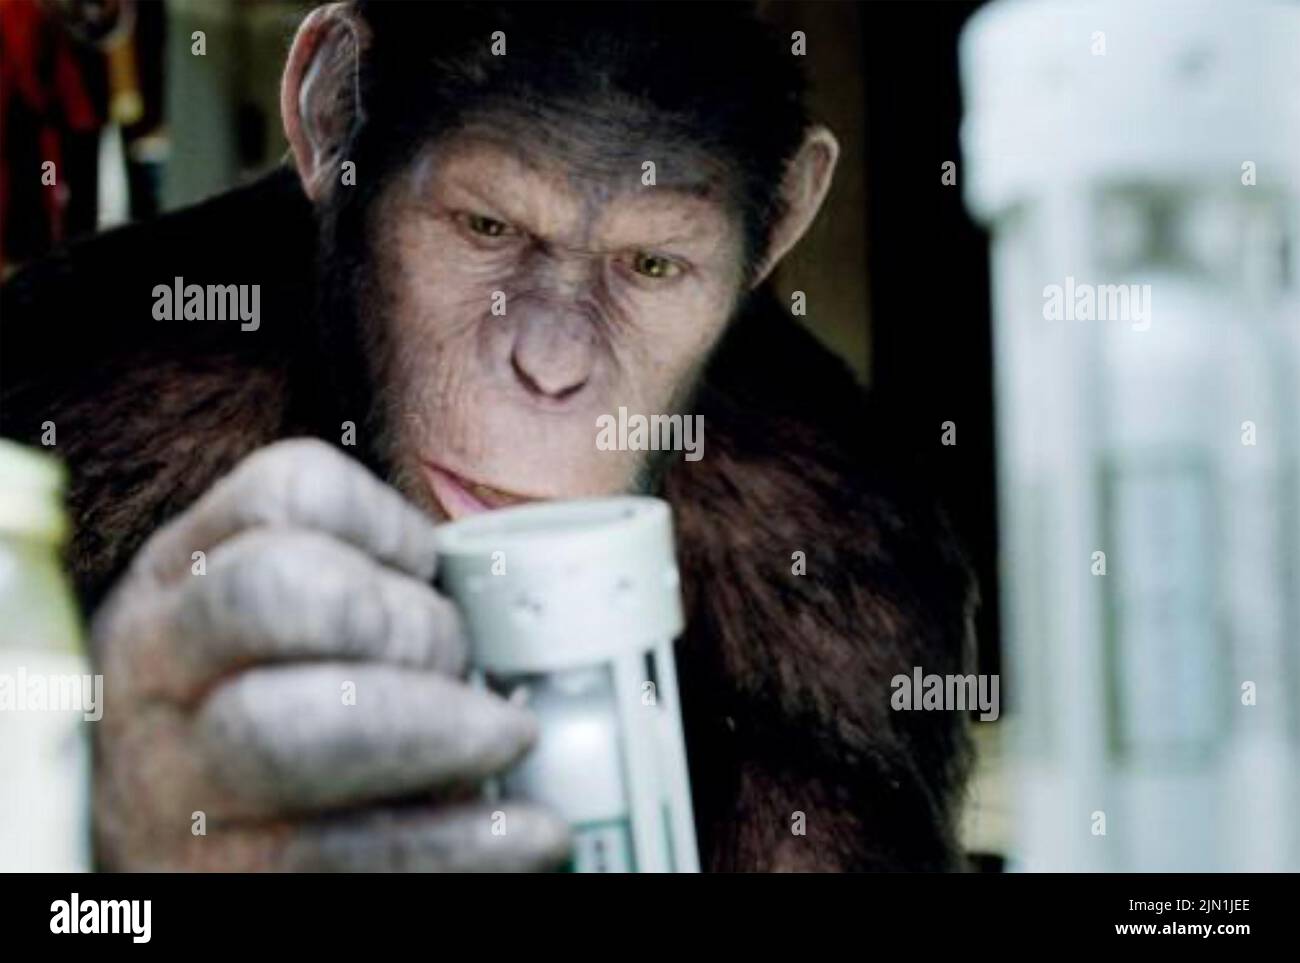 RISE OF THE PLANET OF THE APES 2011 20th Century Fox film Stock Photo